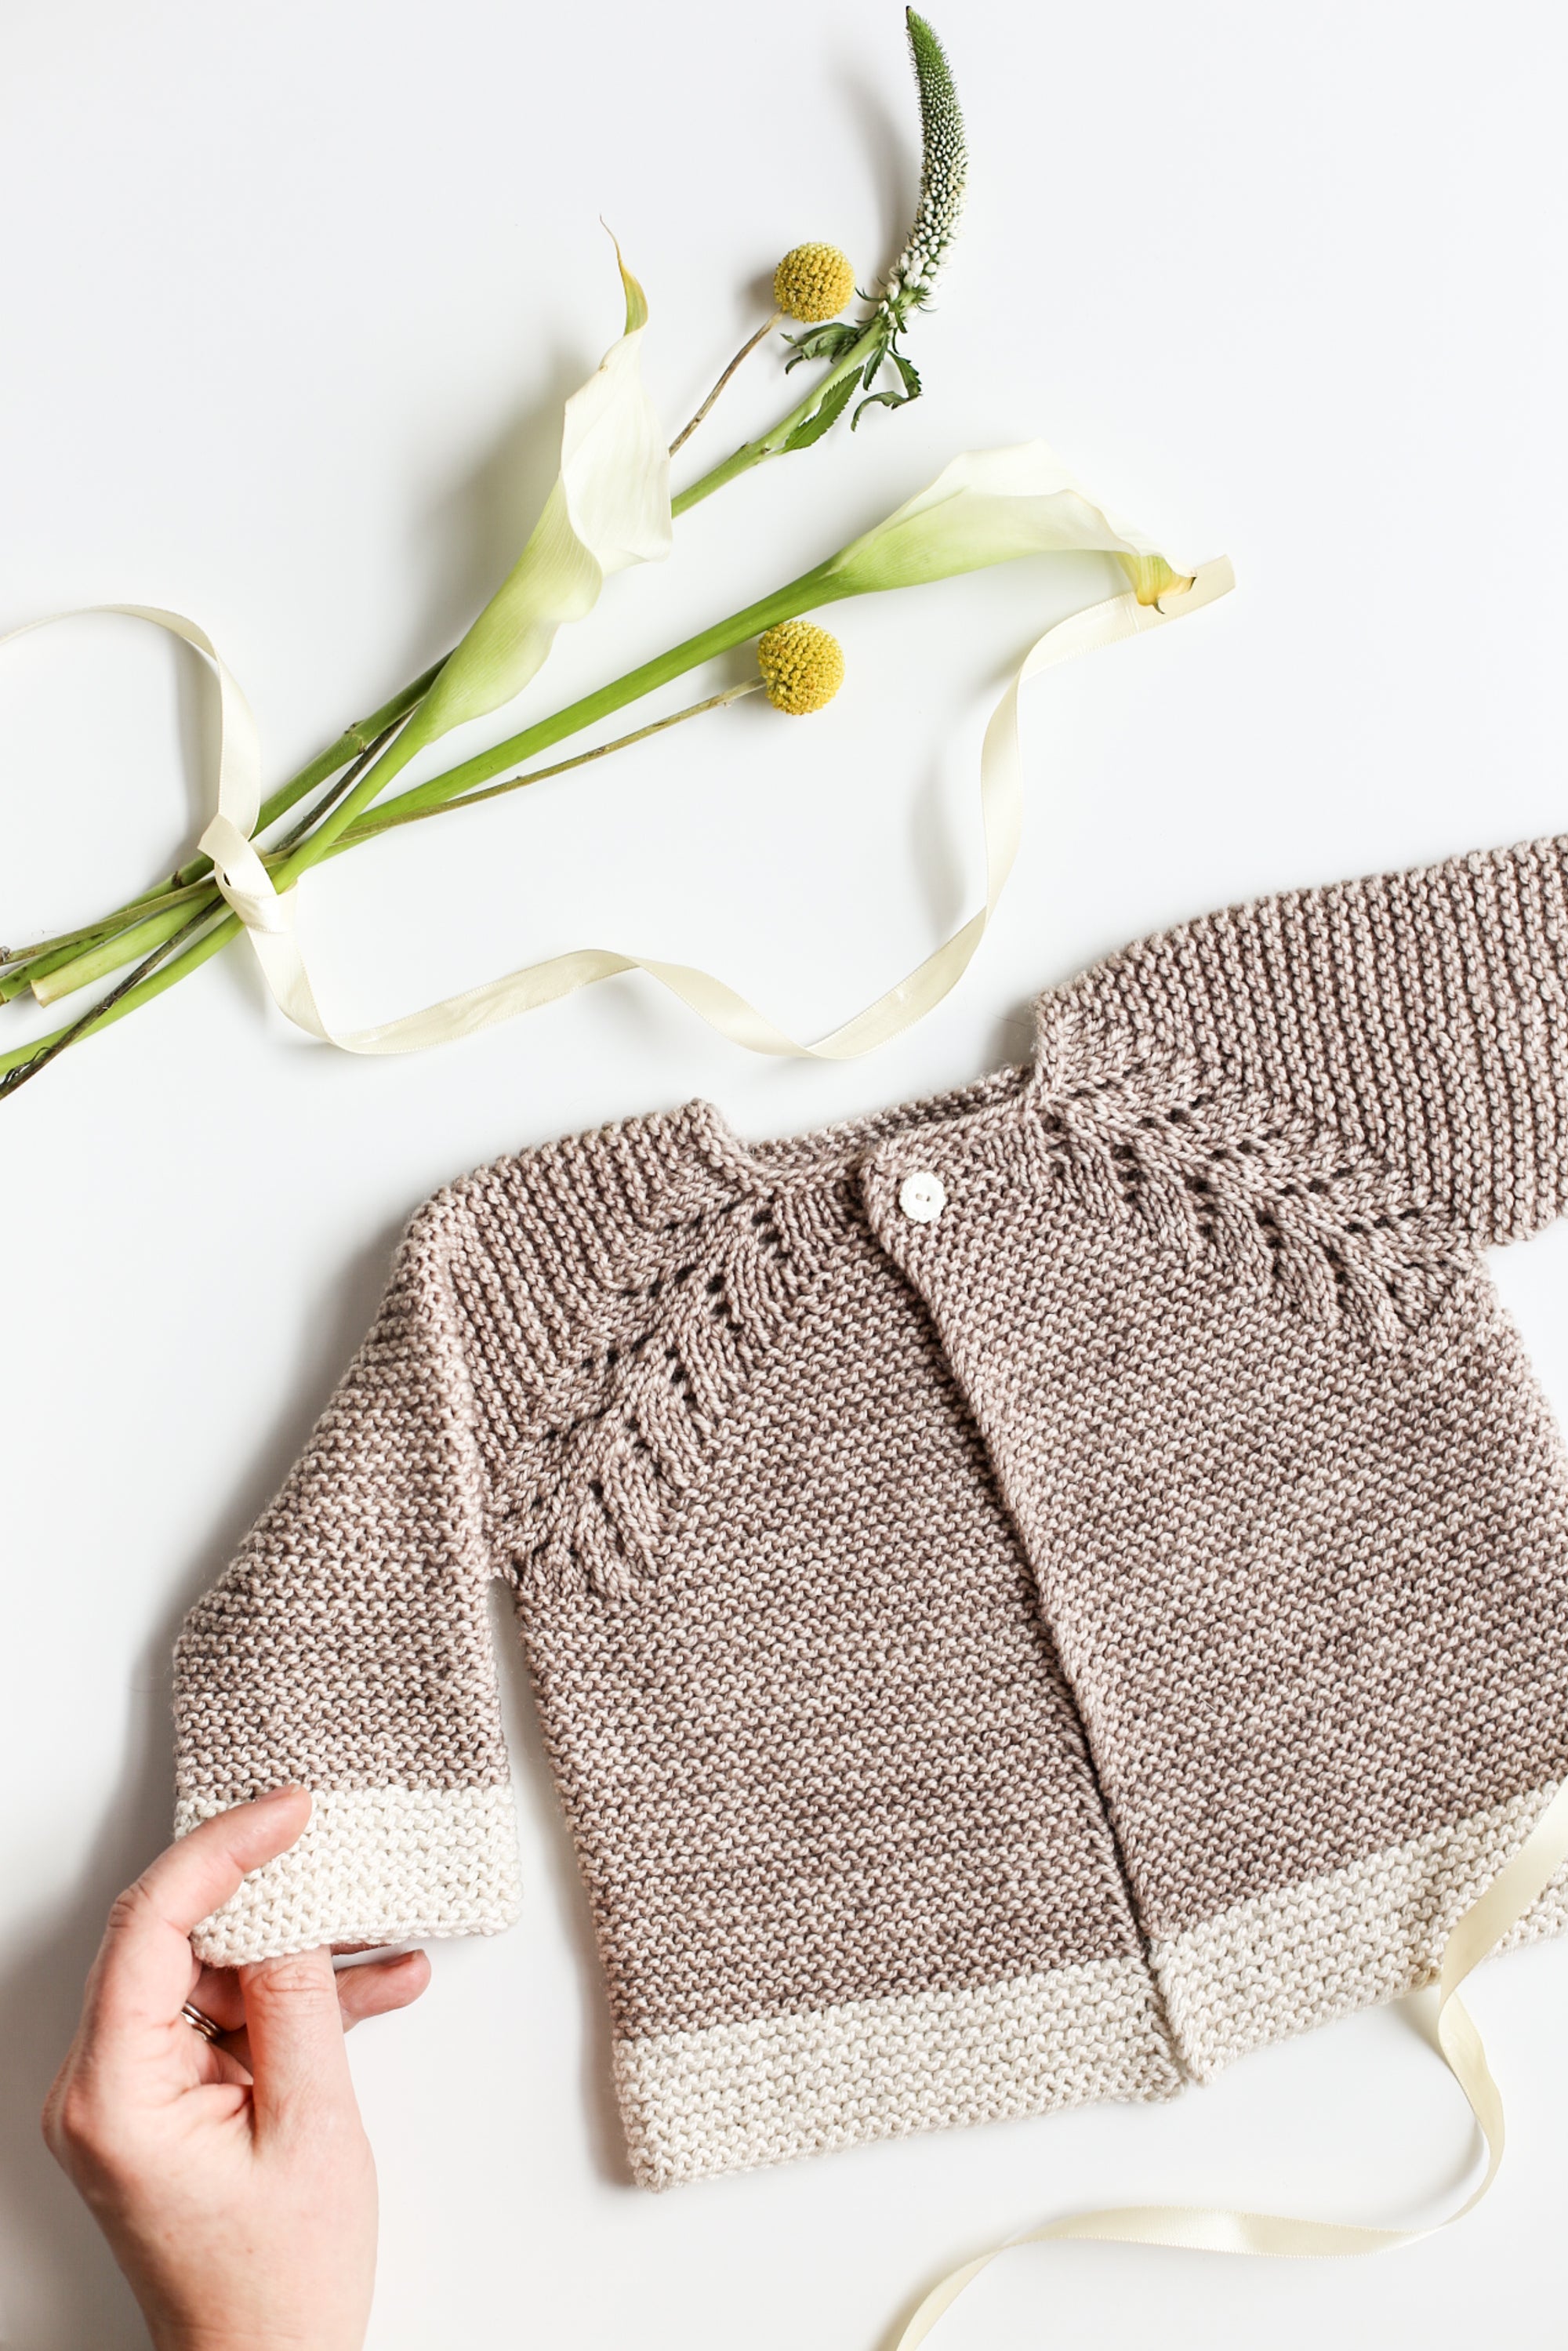 Lovely Knit Top Down Cardigan Baby Sweater